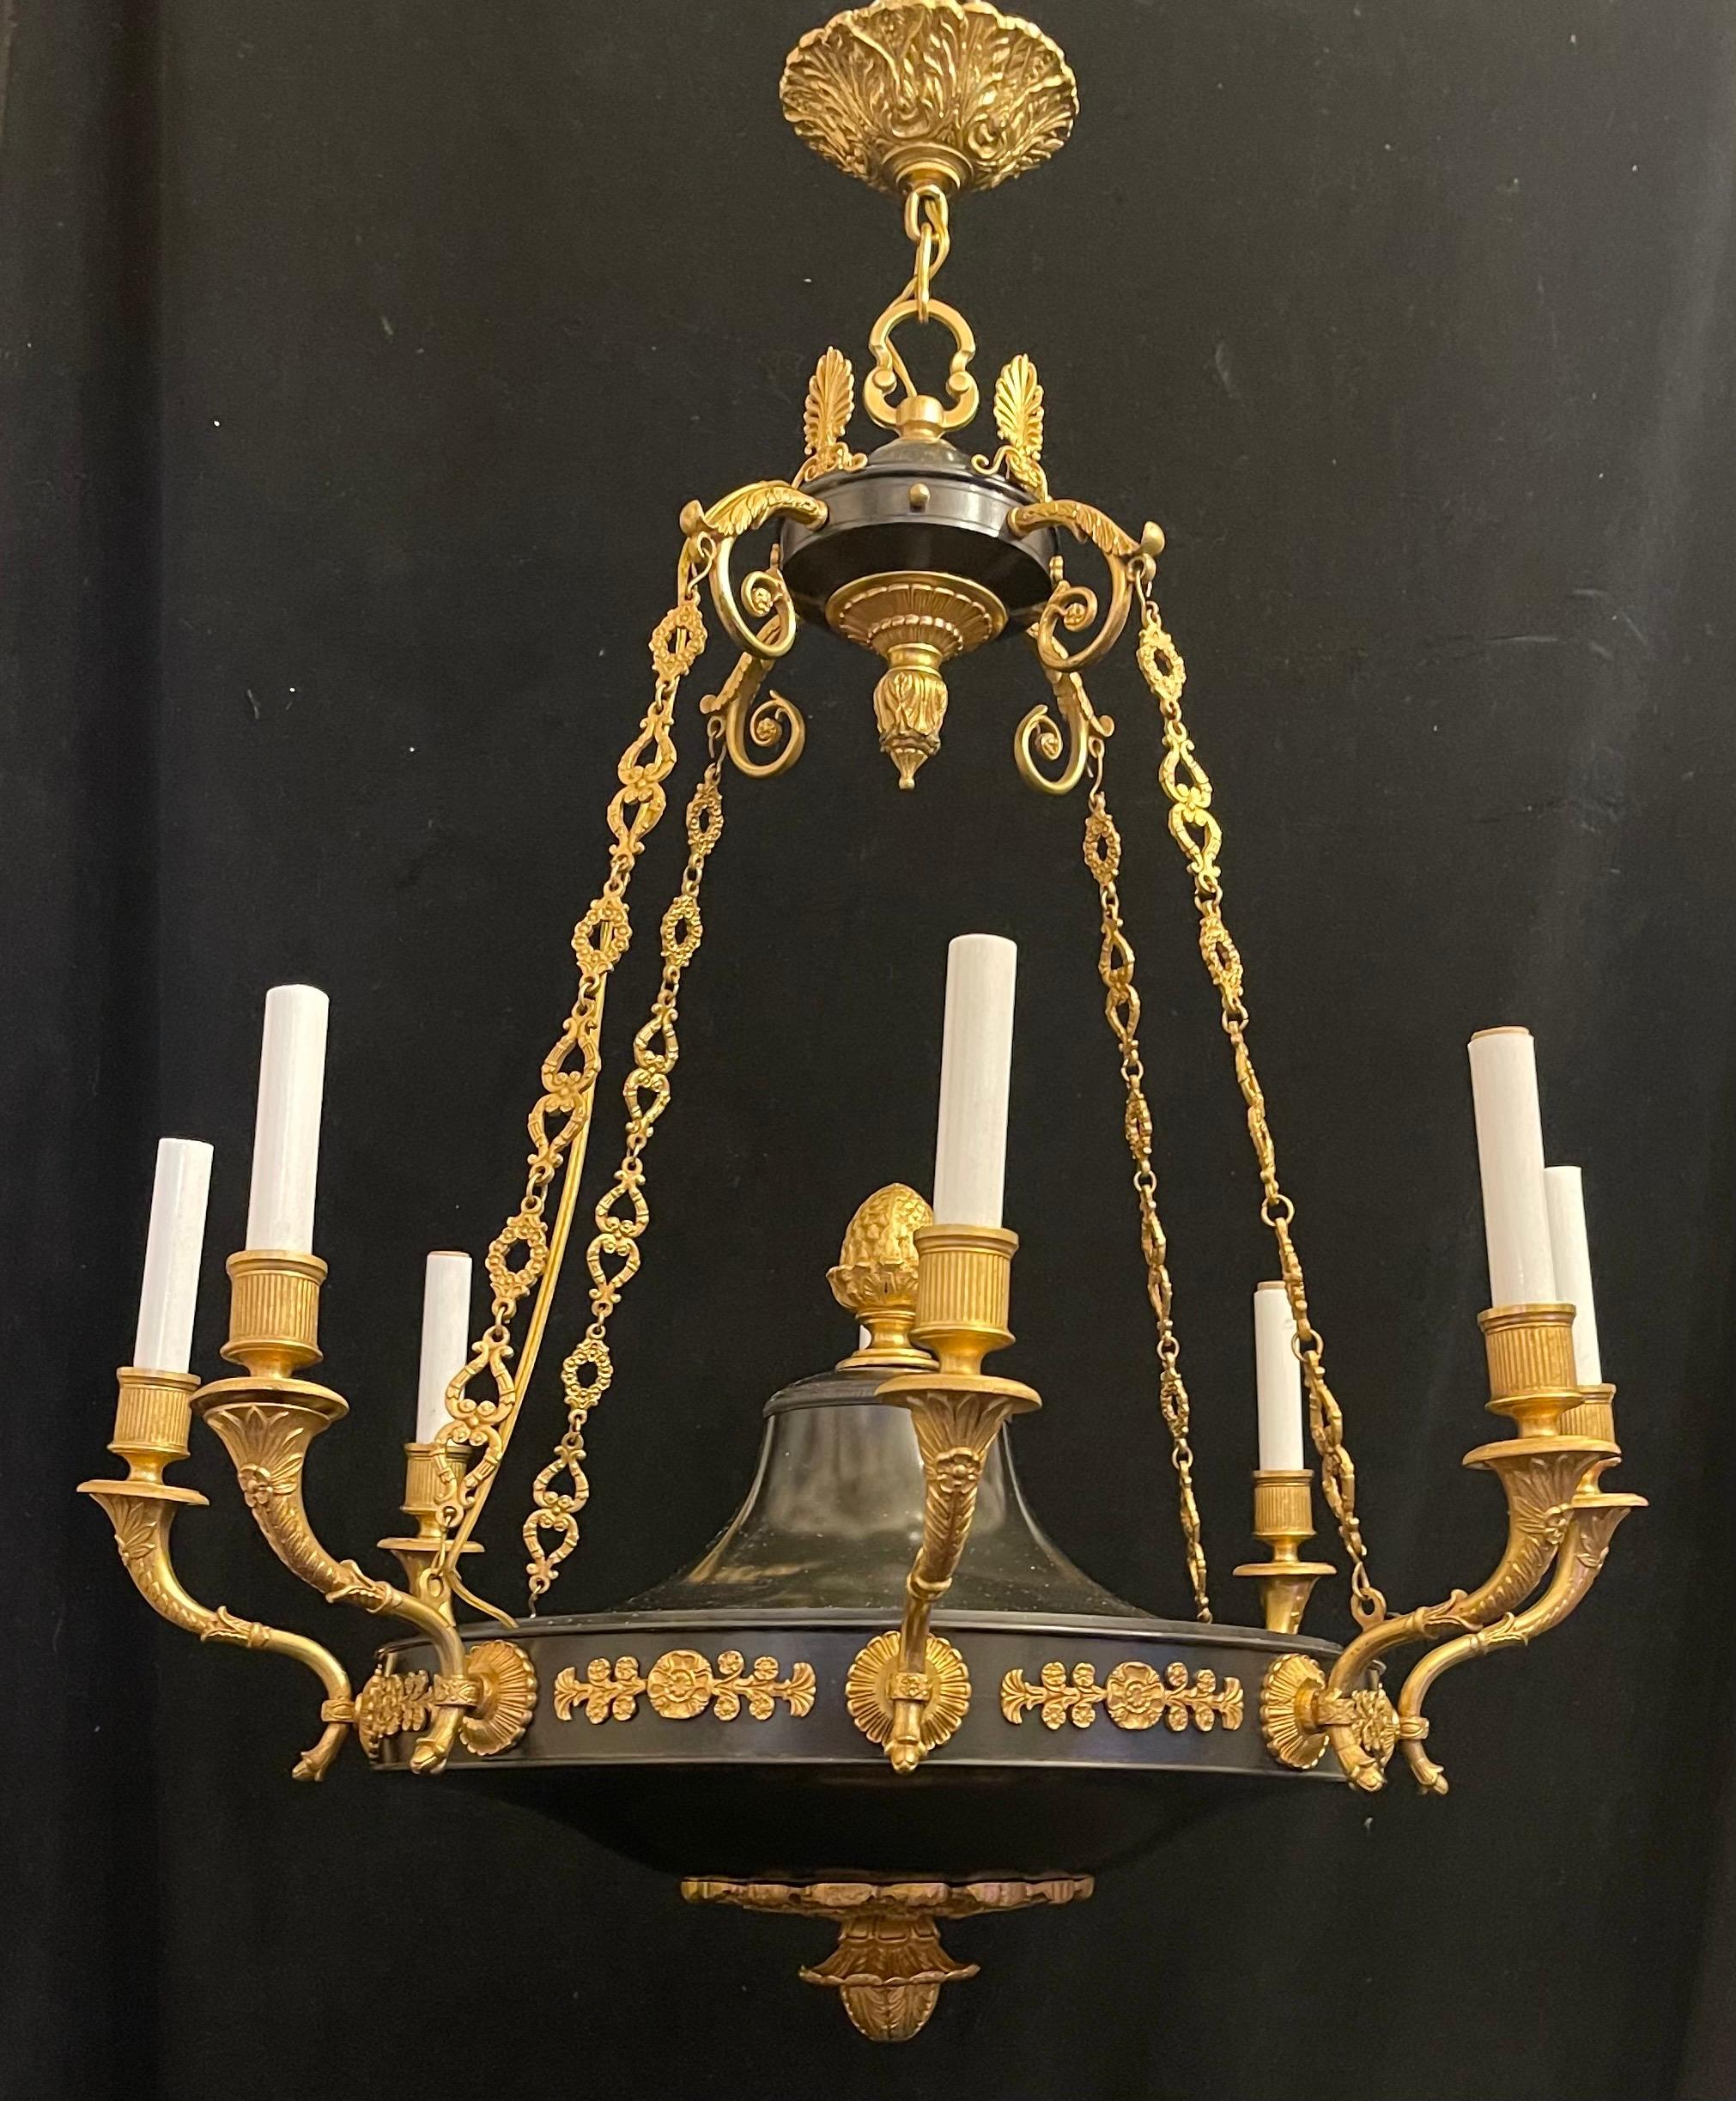 A Wonderful French Empire / Neoclassical Style Patinated & Ormolu Dore Bronze Chandelier 8 Candelabra Light Fixture